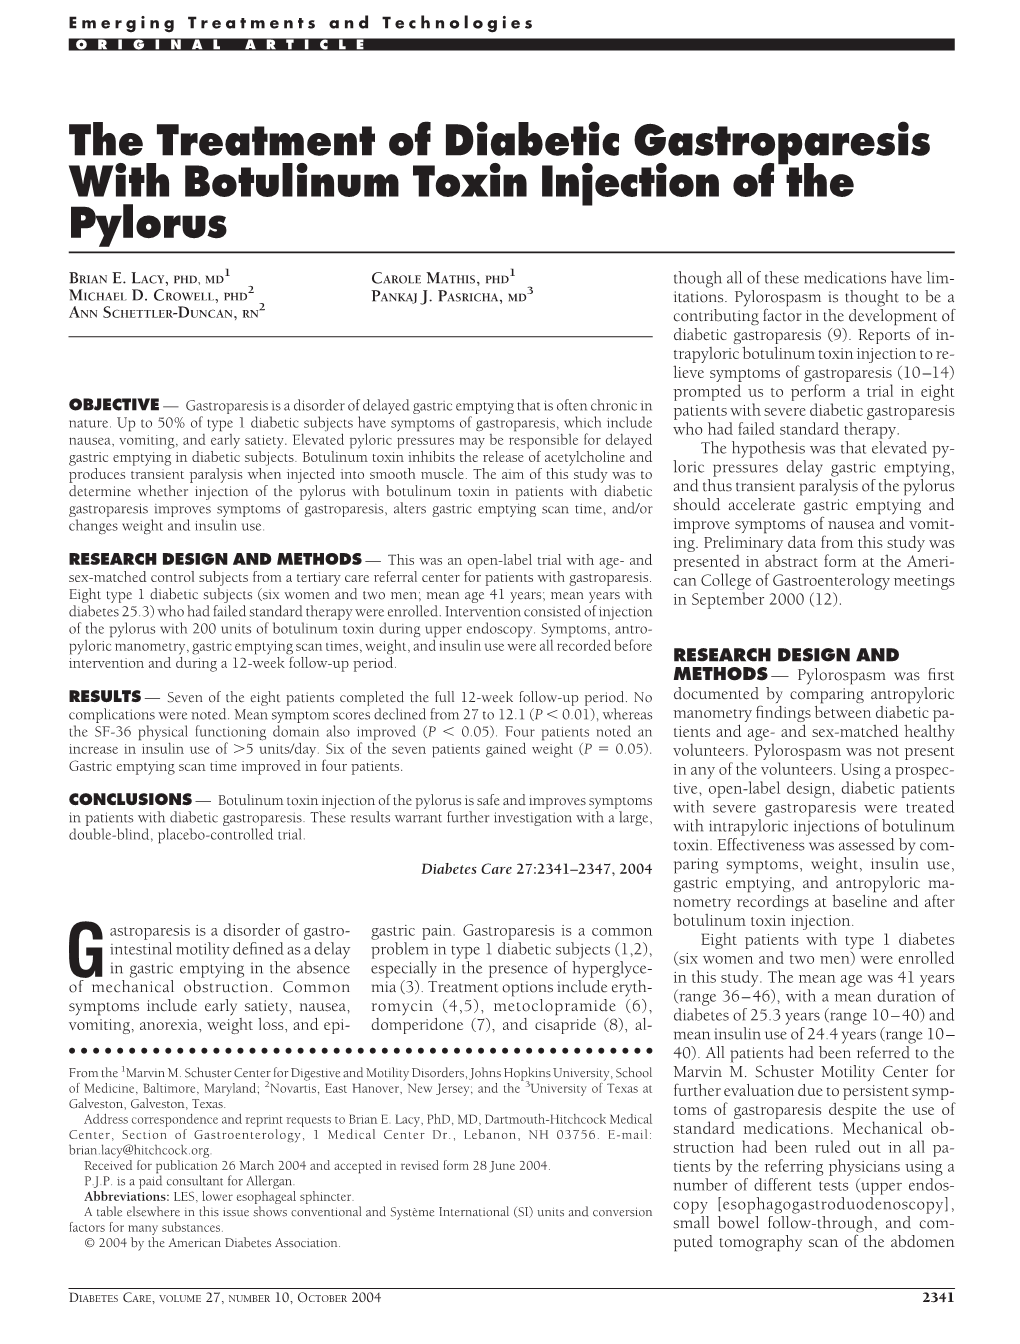 The Treatment of Diabetic Gastroparesis with Botulinum Toxin Injection of the Pylorus